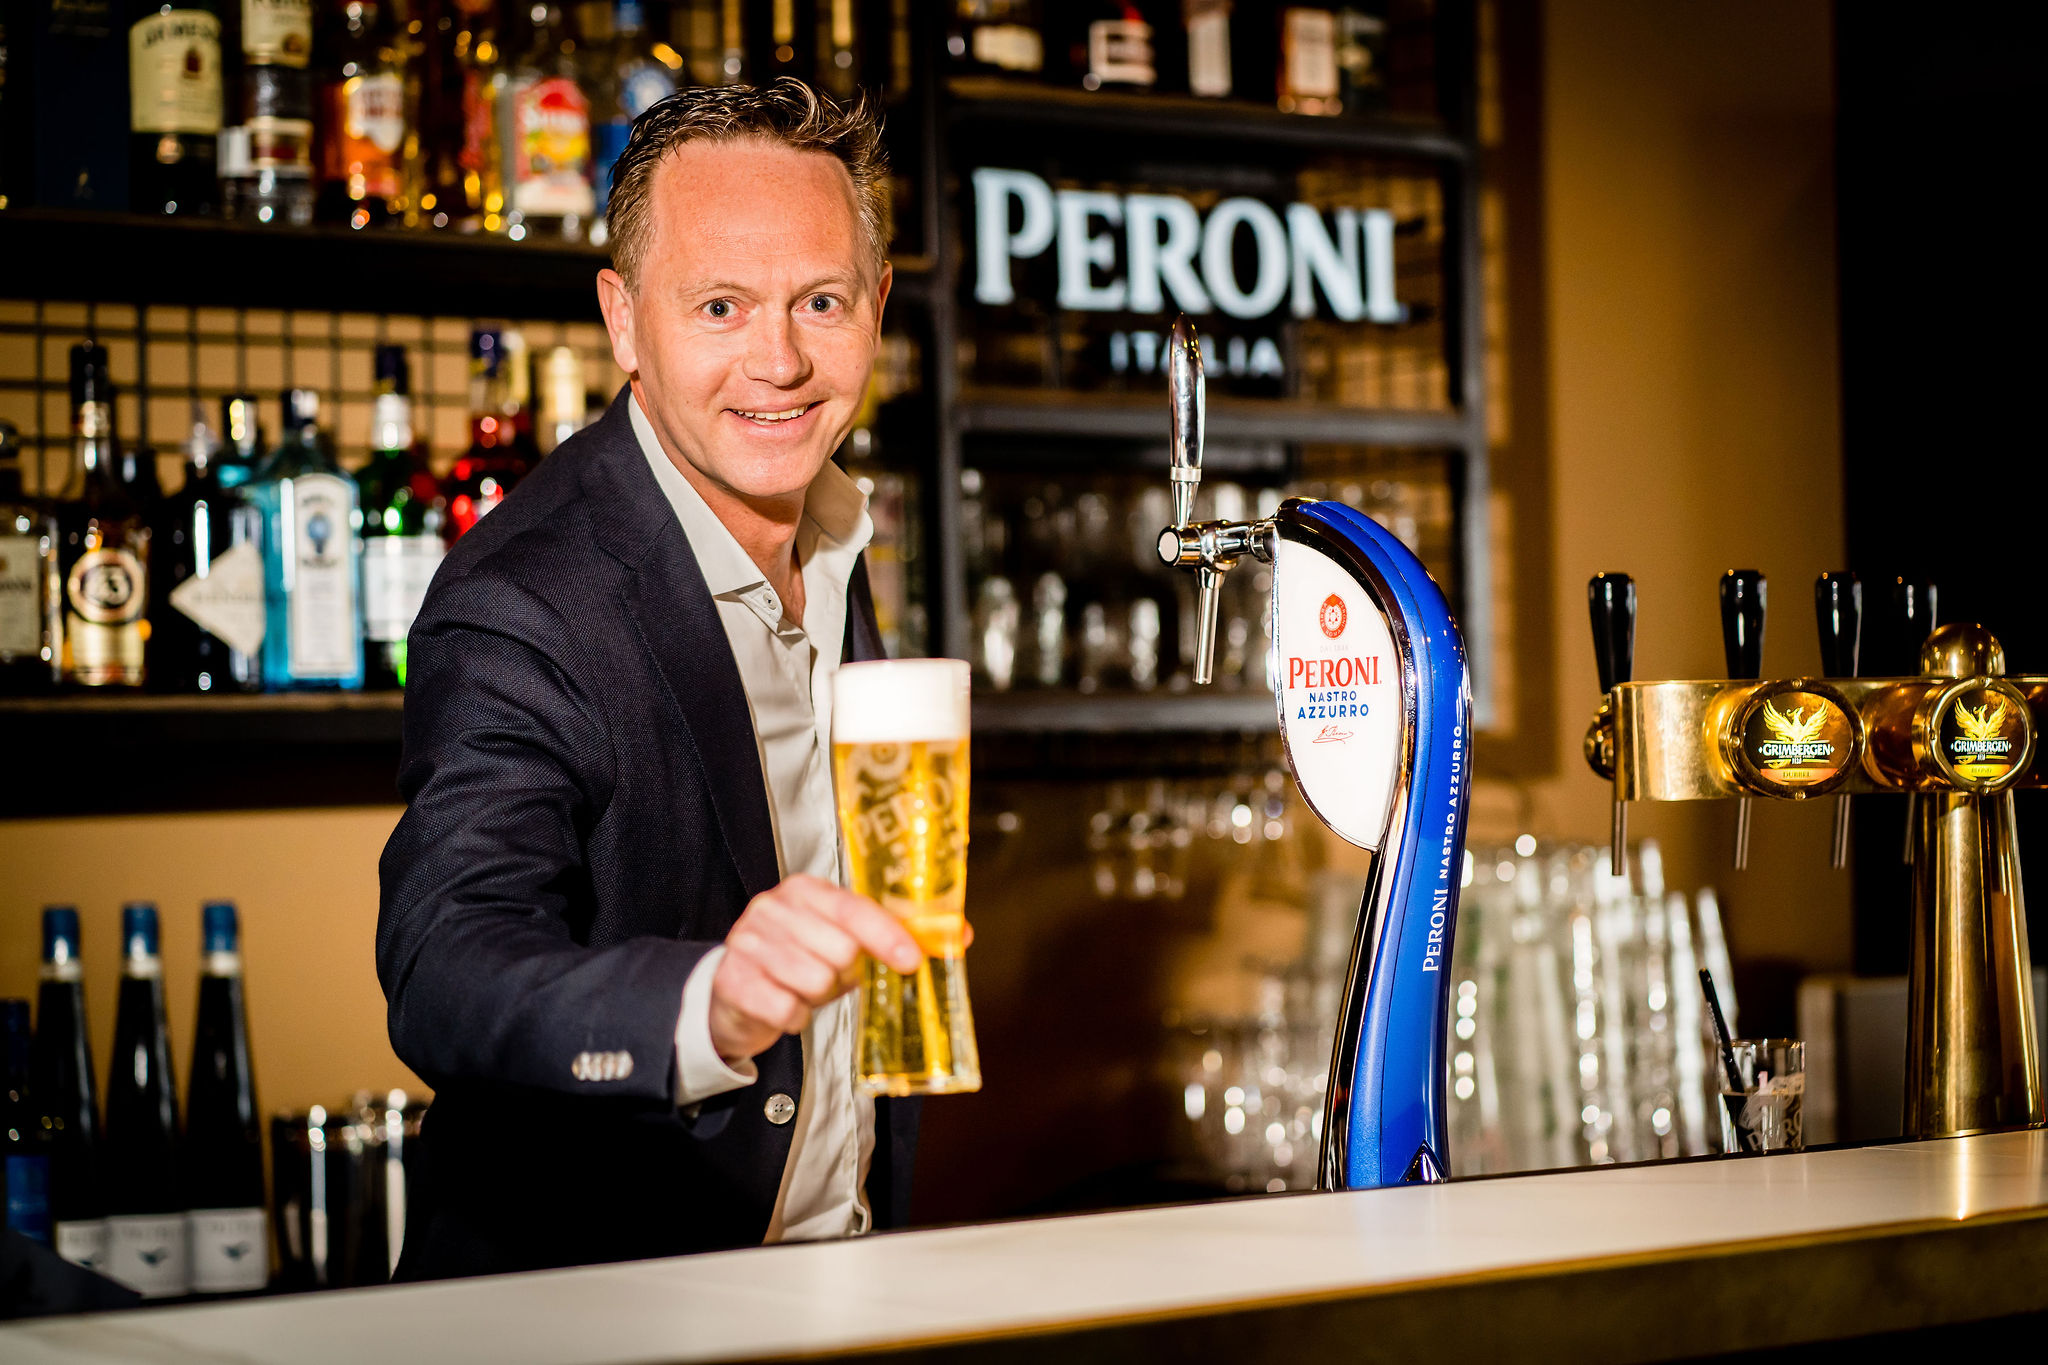 World first: Netherlands first country with tanker beer Peroni Nastro Azzurro 